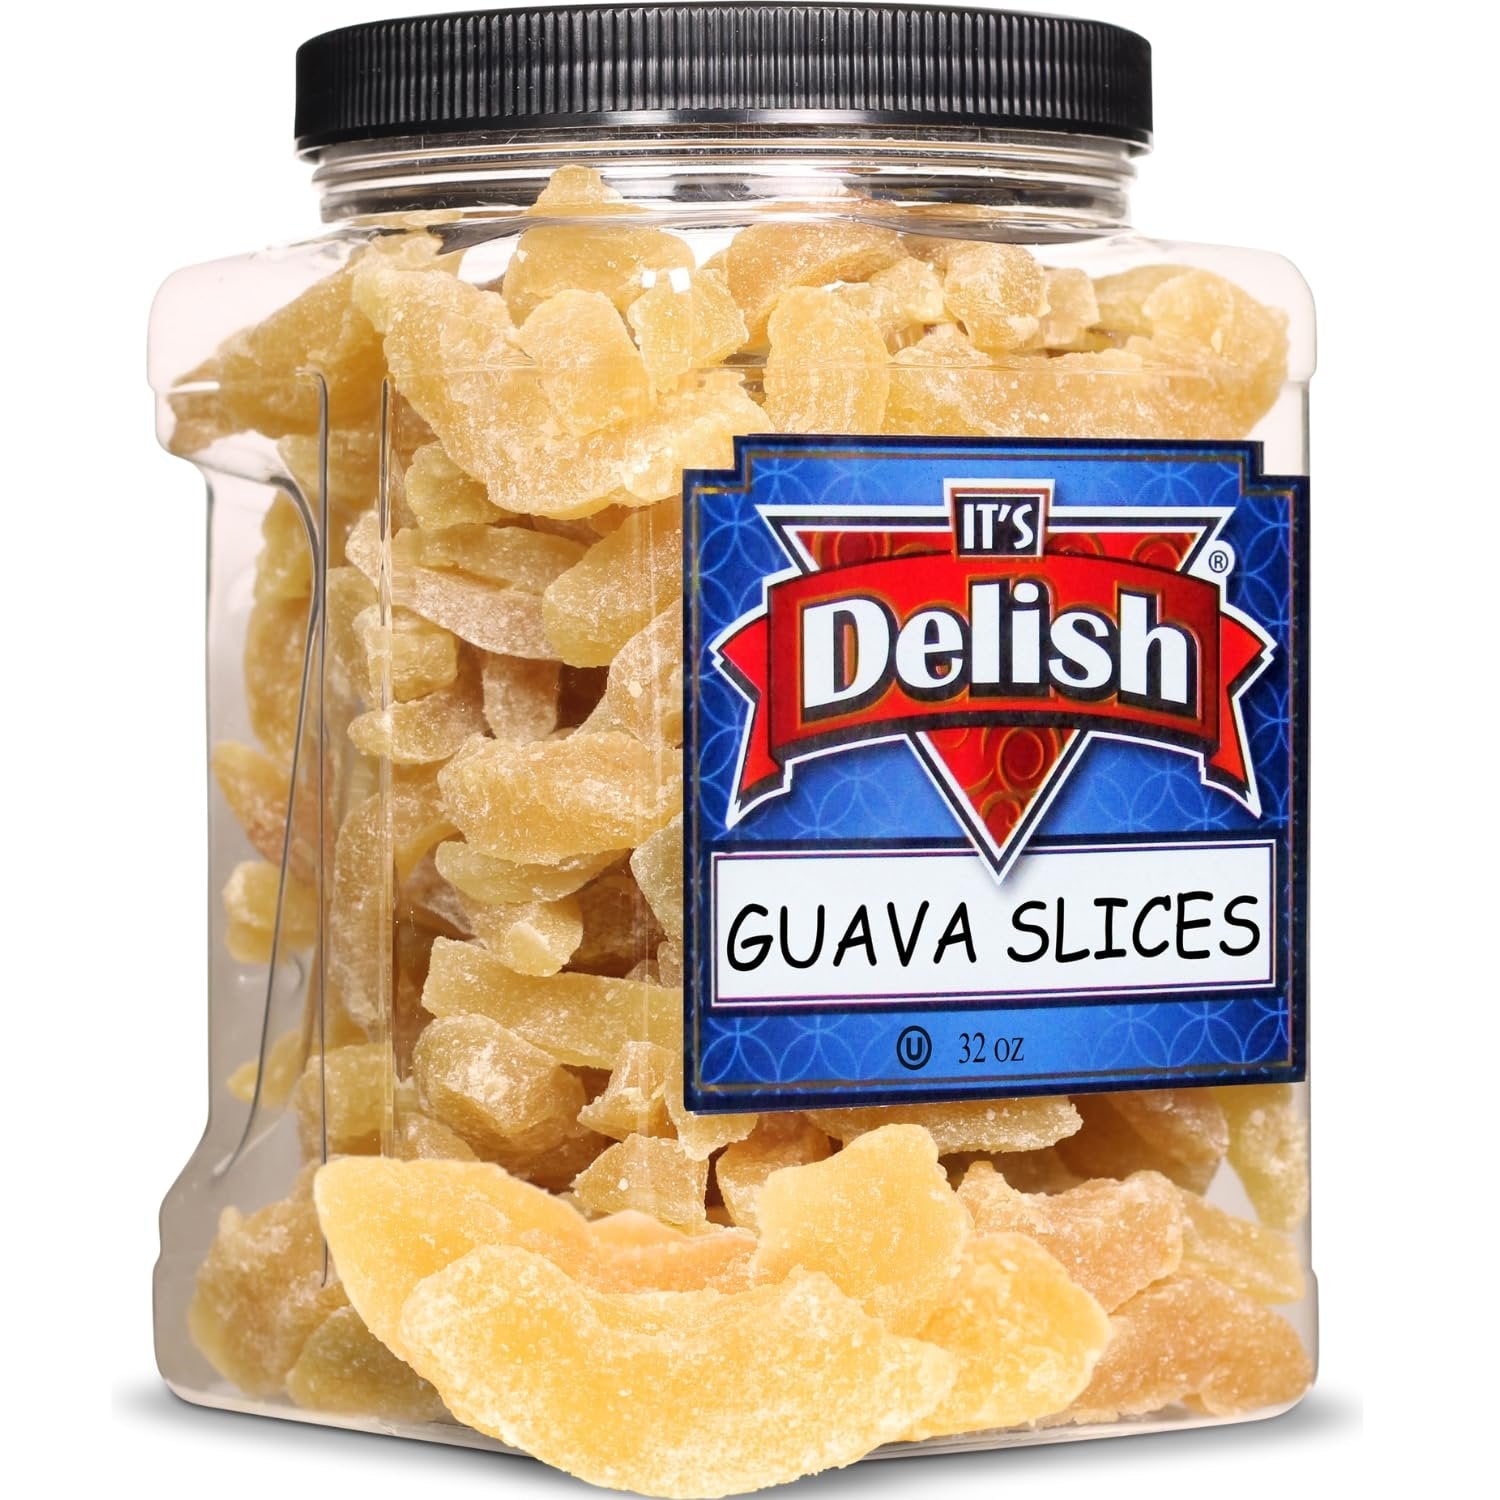 Dried Guava Slices, 2 LBS Jumbo Reusable Container